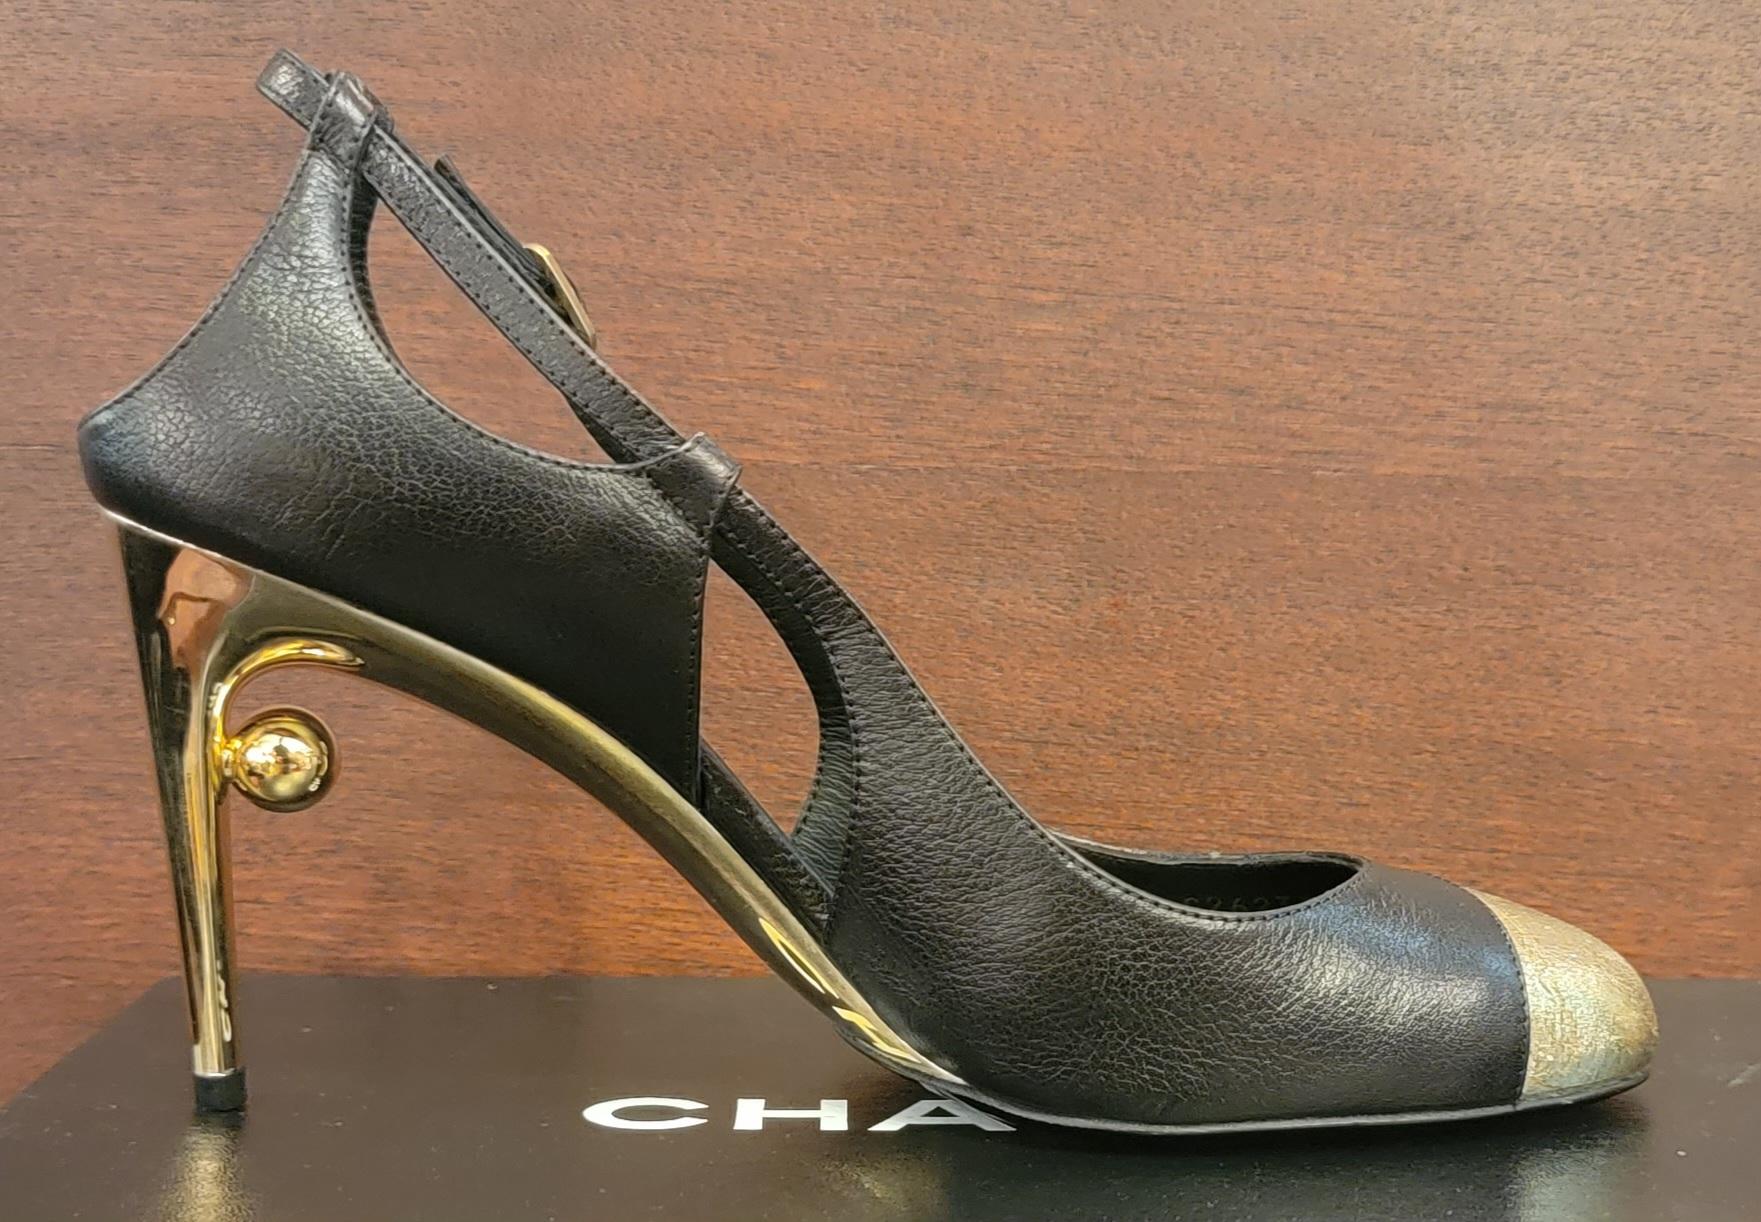 Women's or Men's Authentic Chanel Size 38.5 Leather High Heel Shoes W/Gold Accents For Sale